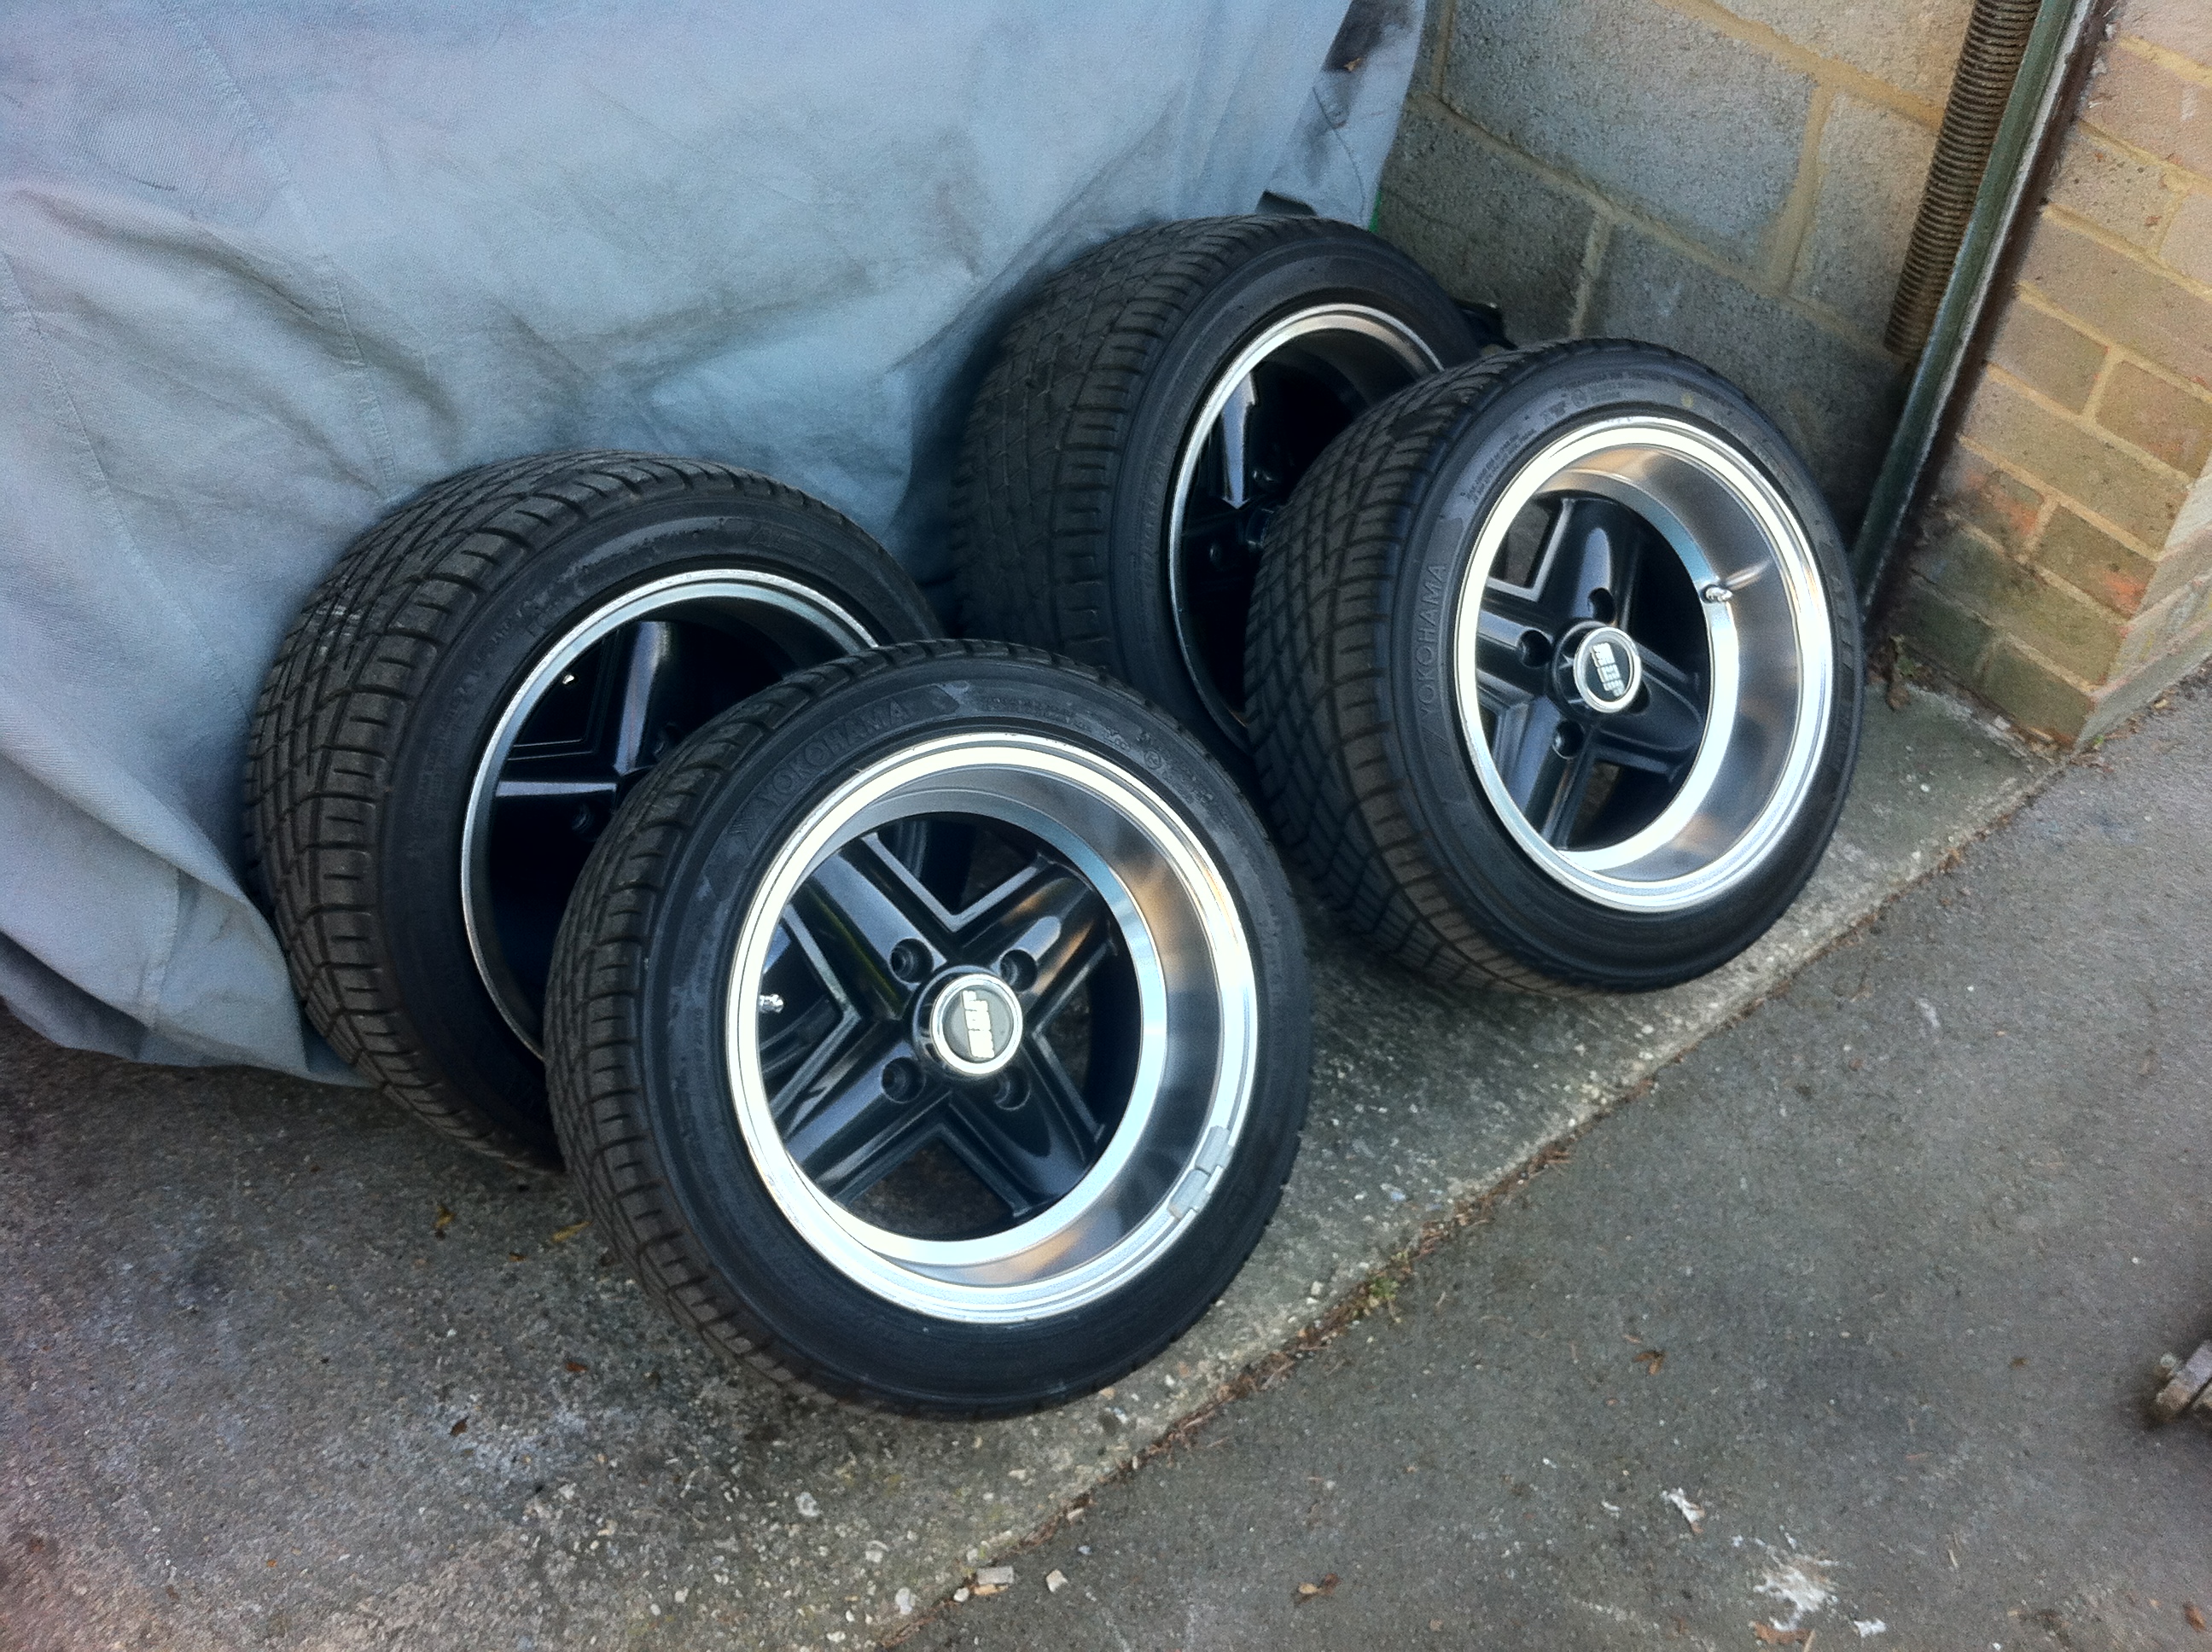 Revolite 7x13 With 175 50 13 Tyres Old Skool Ford Parts For Sale Old Skool Ford